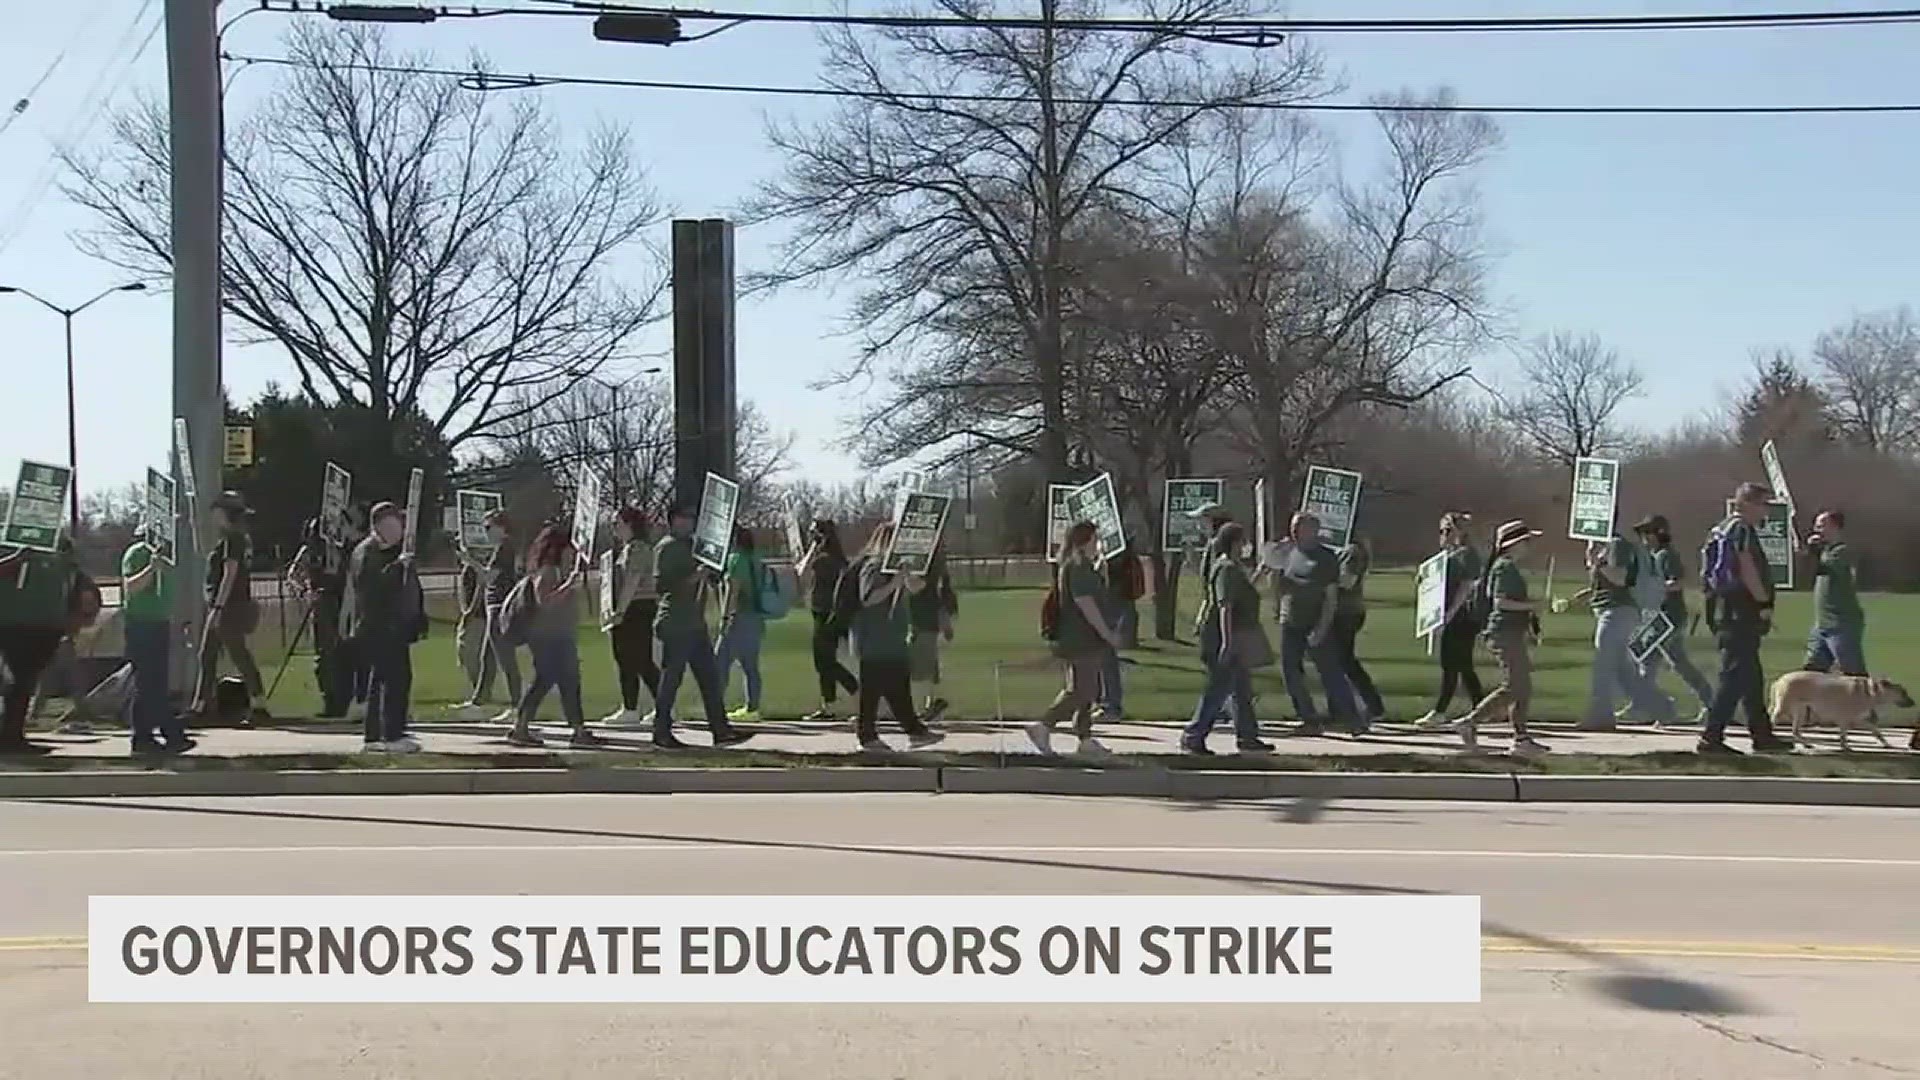 Governors State University has joined Eastern Illinois and Chicago State on the picket lines after union negotiations failed to reach a deal.